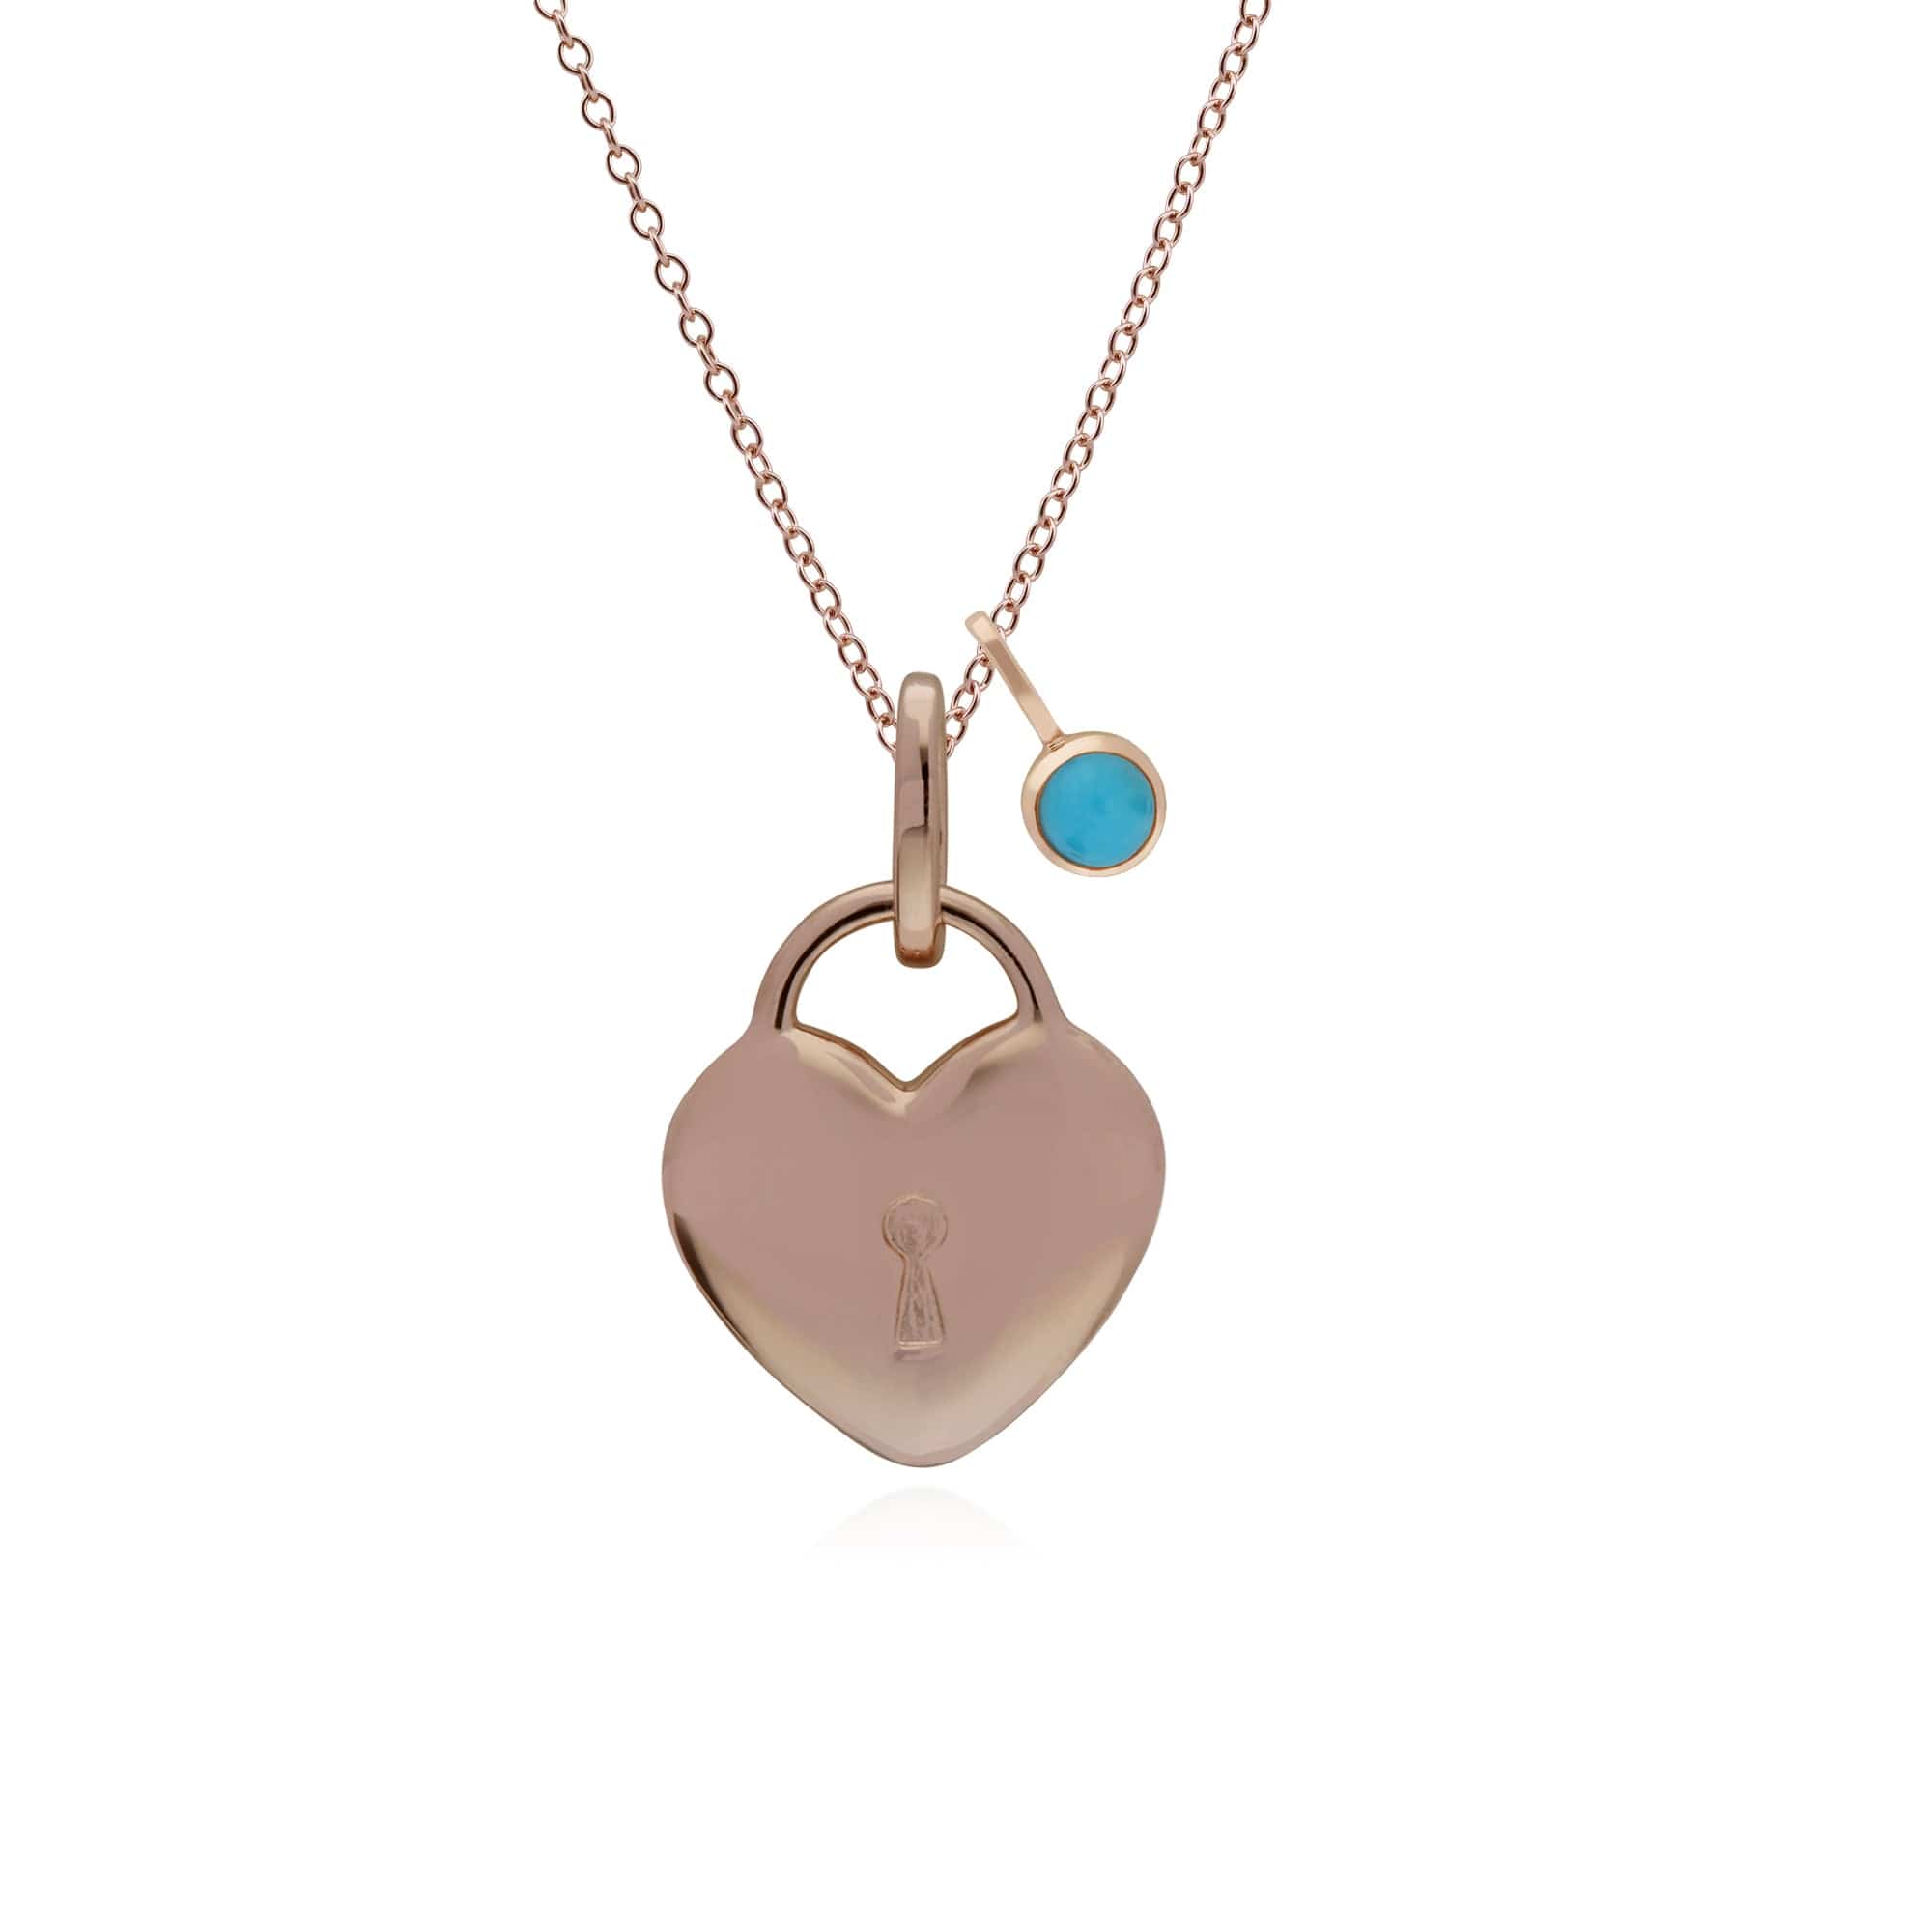 270P028501925-270P026901925 Classic Plain Heart Lock Pendant & Turquoise Charm in Rose Gold Plated 925 Sterling Silver 1